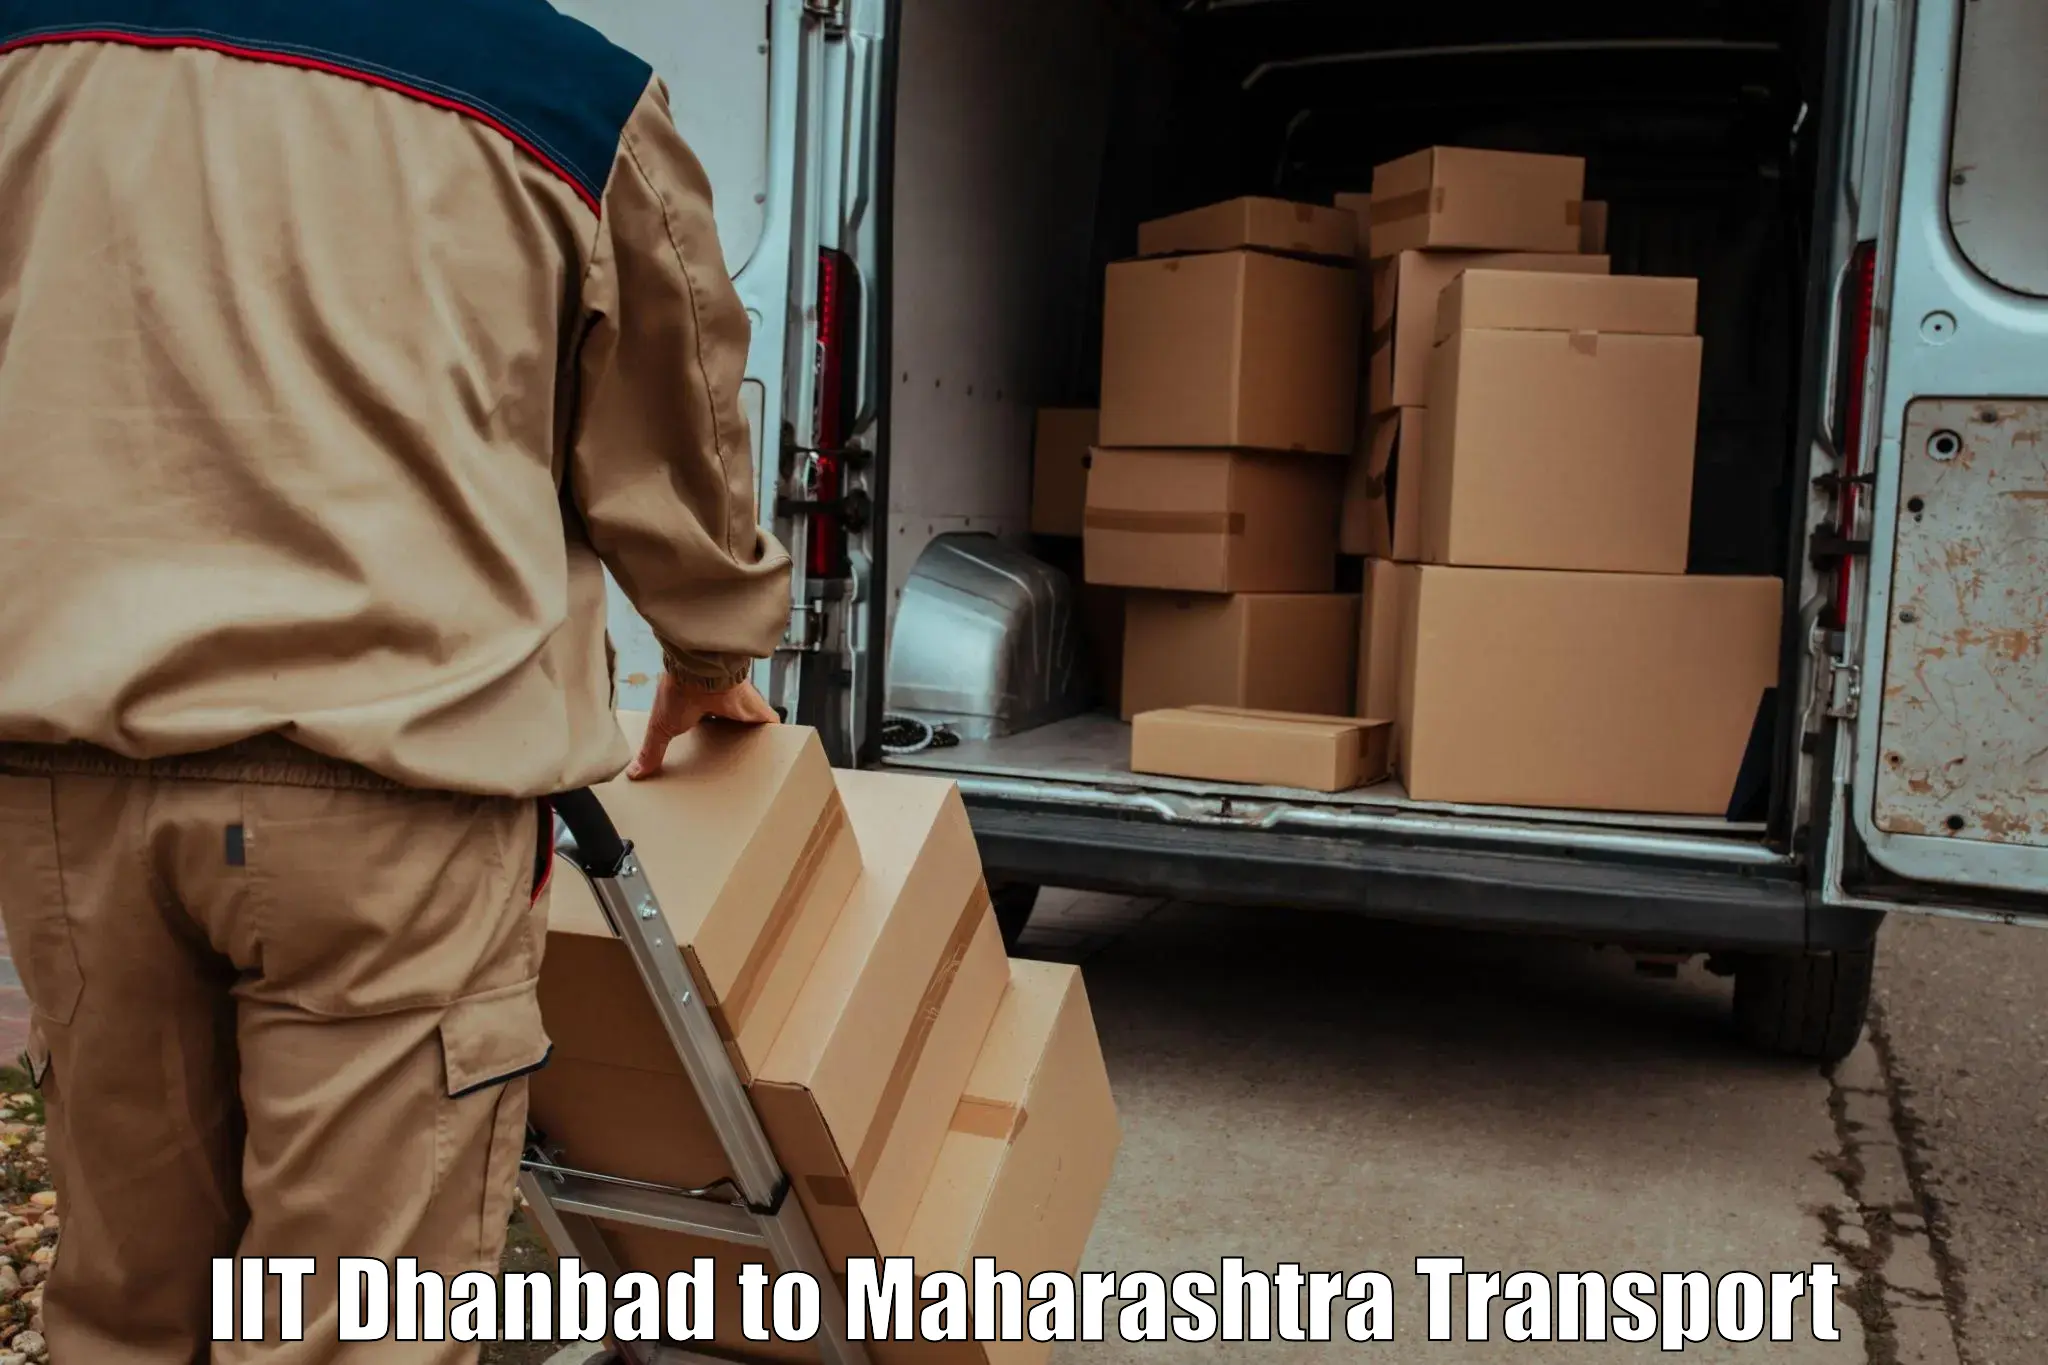 Nearby transport service IIT Dhanbad to Ghatanji